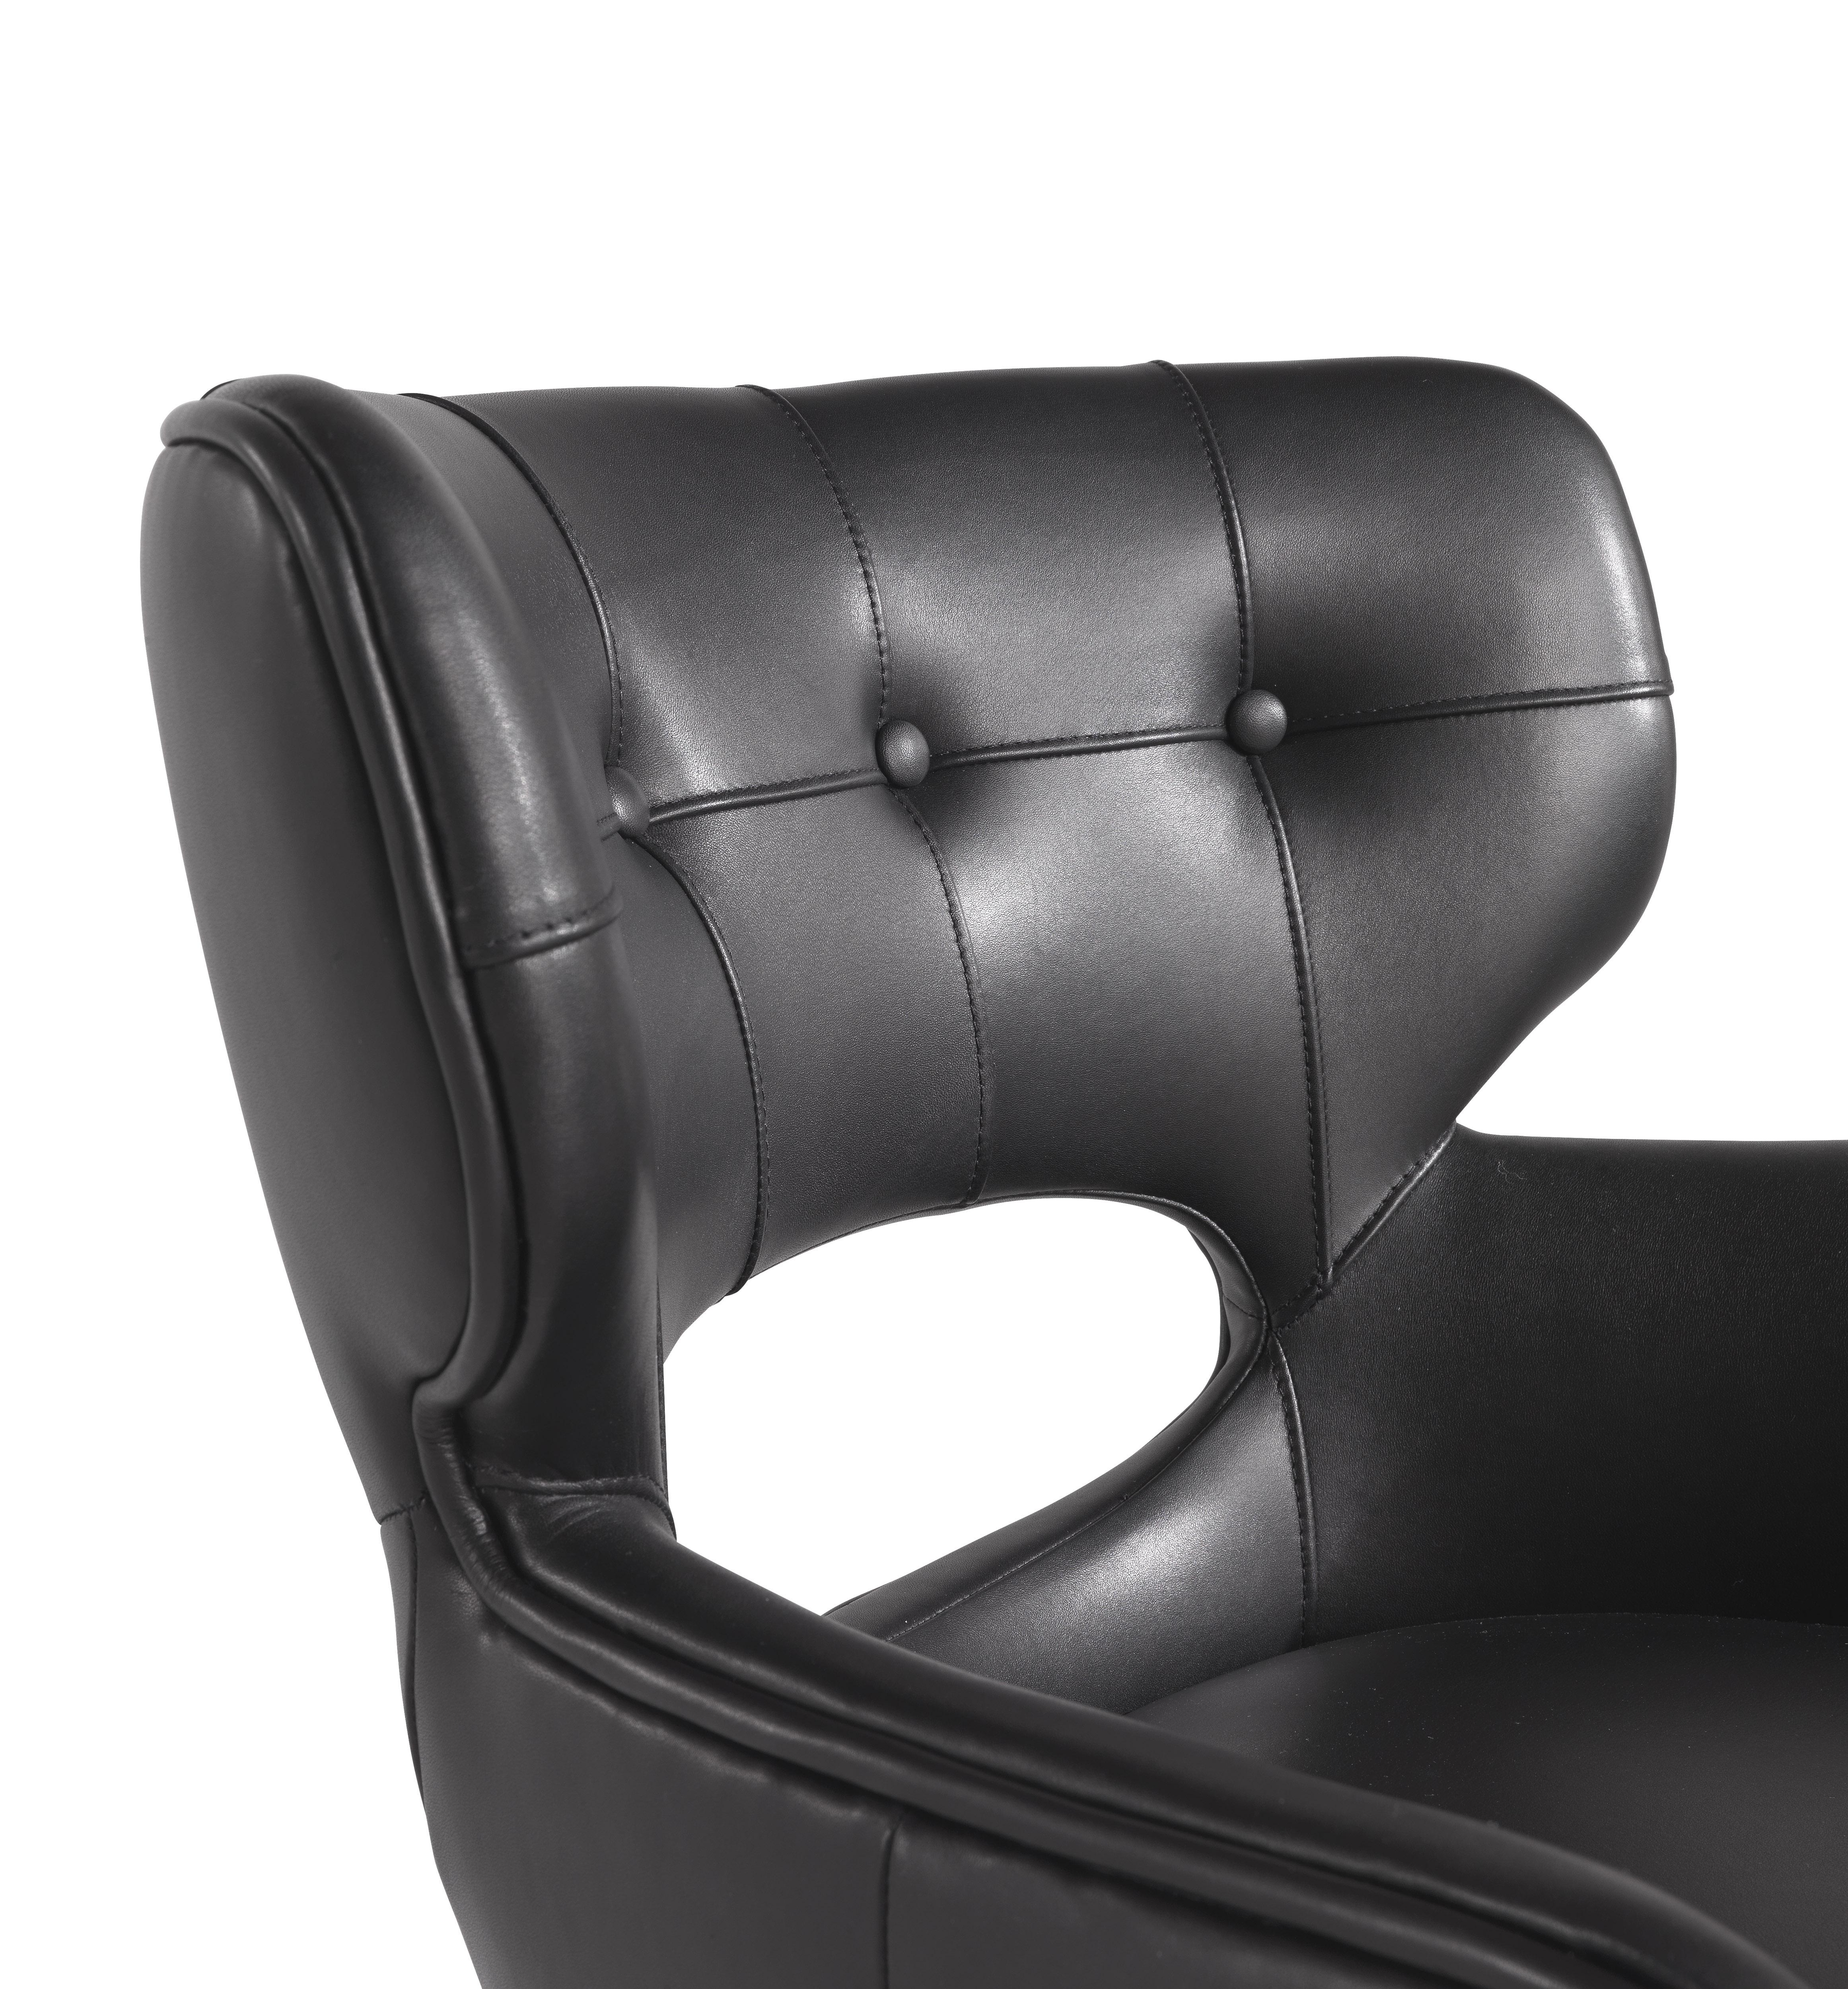 Italian 21st Century Maclaine Chair in Black Leather by Roberto Cavalli Home Interiors For Sale